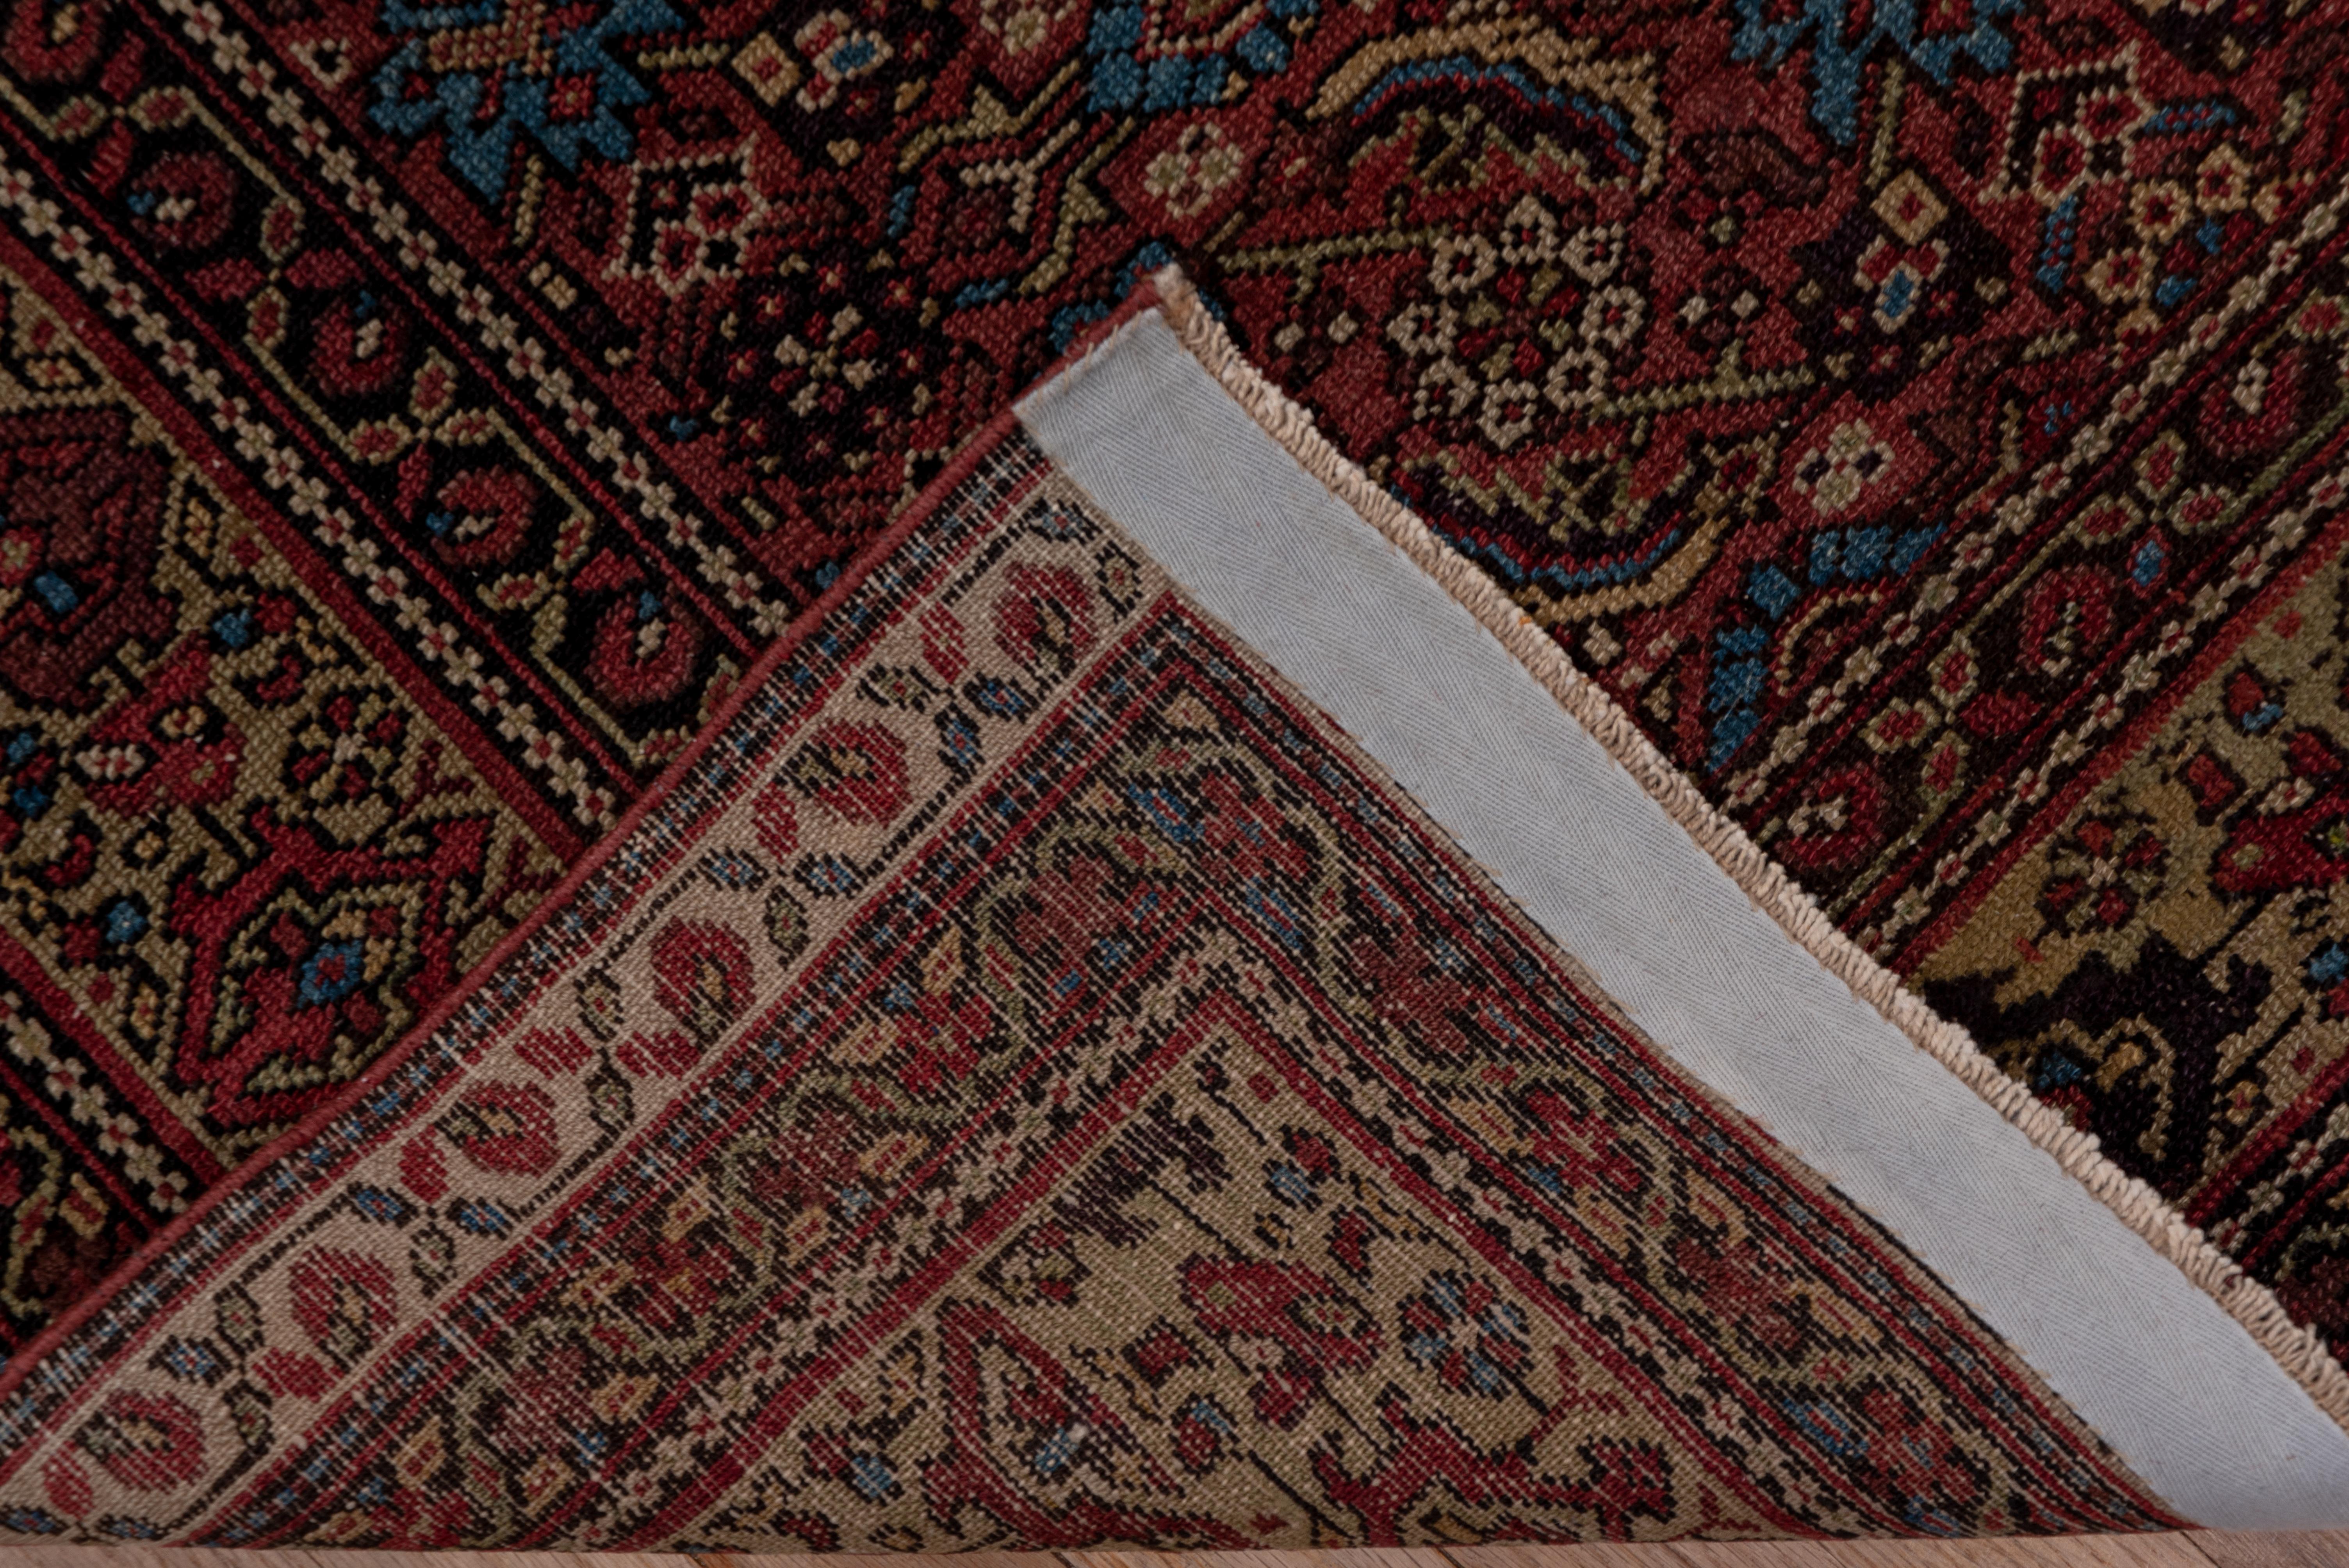 The cardinal red field shows a proper rendering of the allover Herati design with prominent oneway palmettes and rotating double sickle leaves. Straw-camel border with simple reversing turtles. Quality west Persian village work with medium weave.